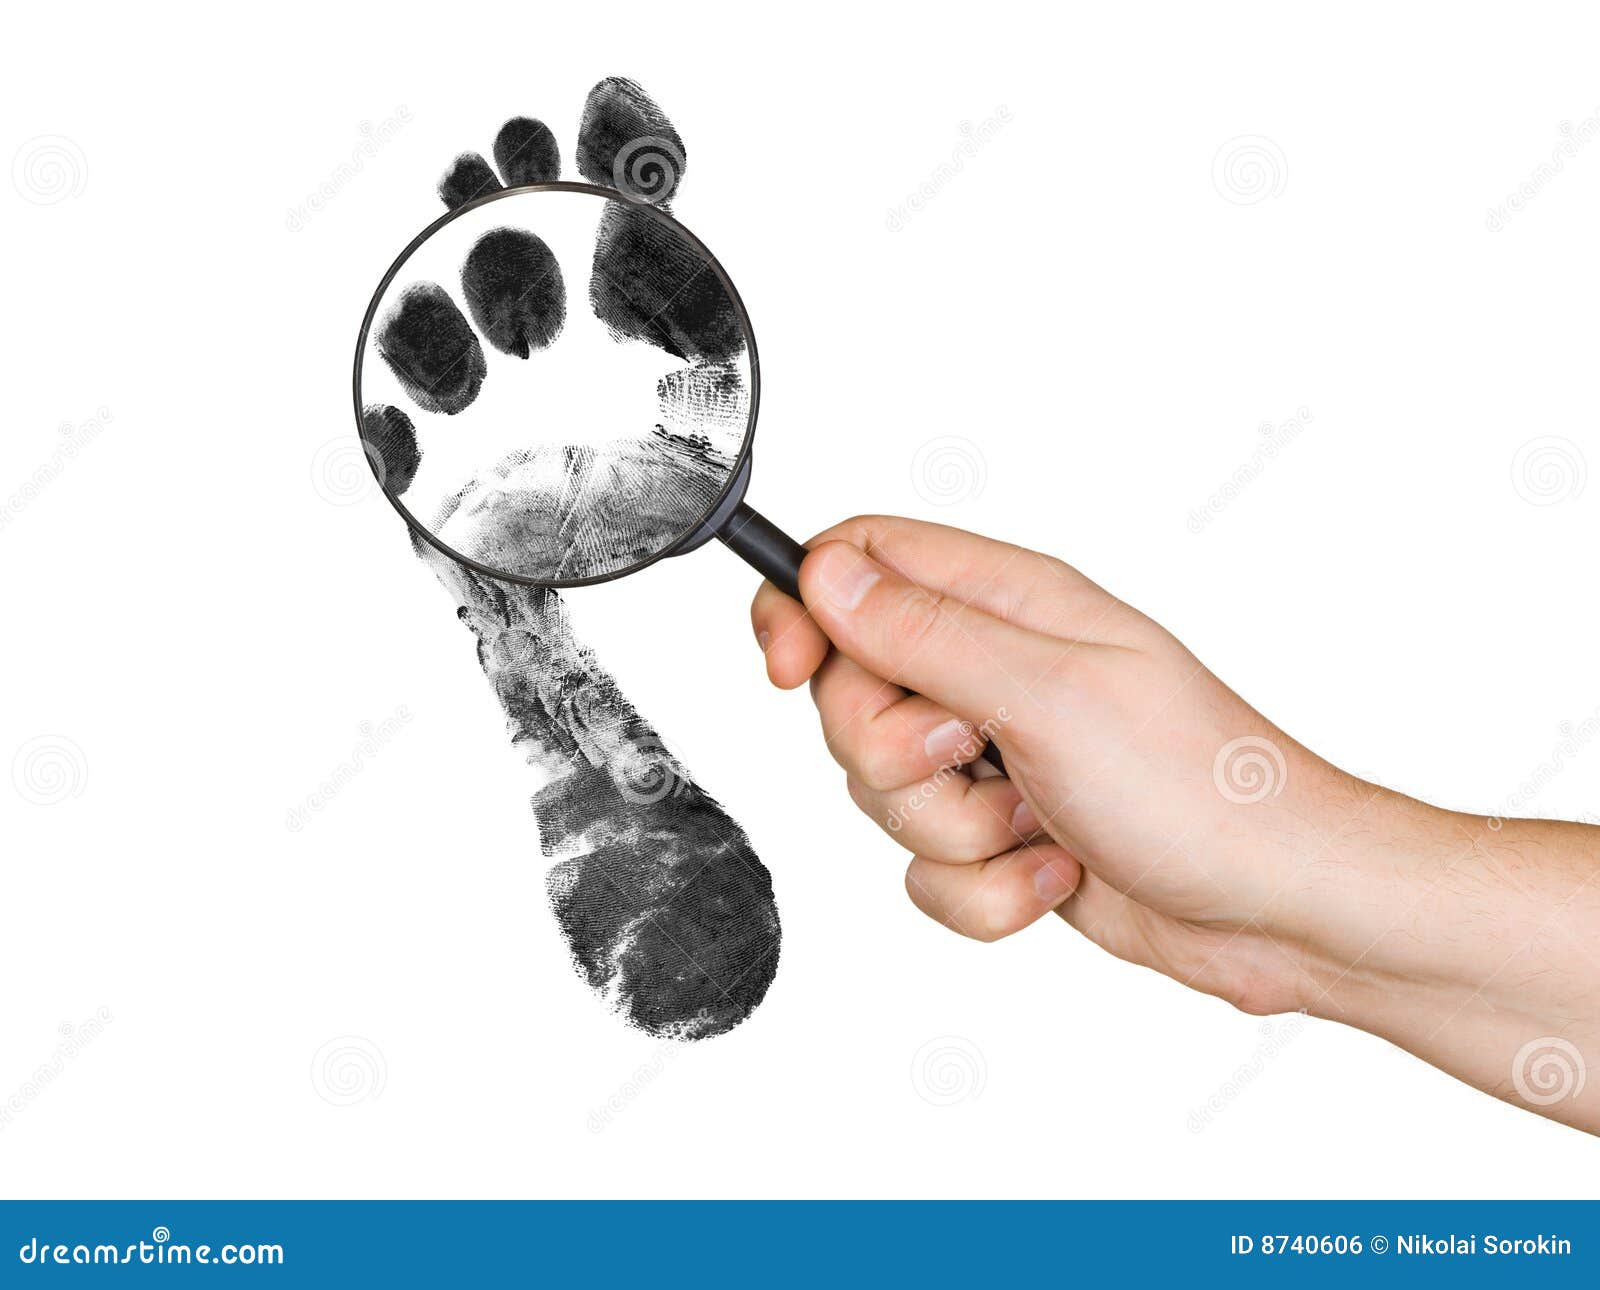 magnifying glass in hand and foot printout